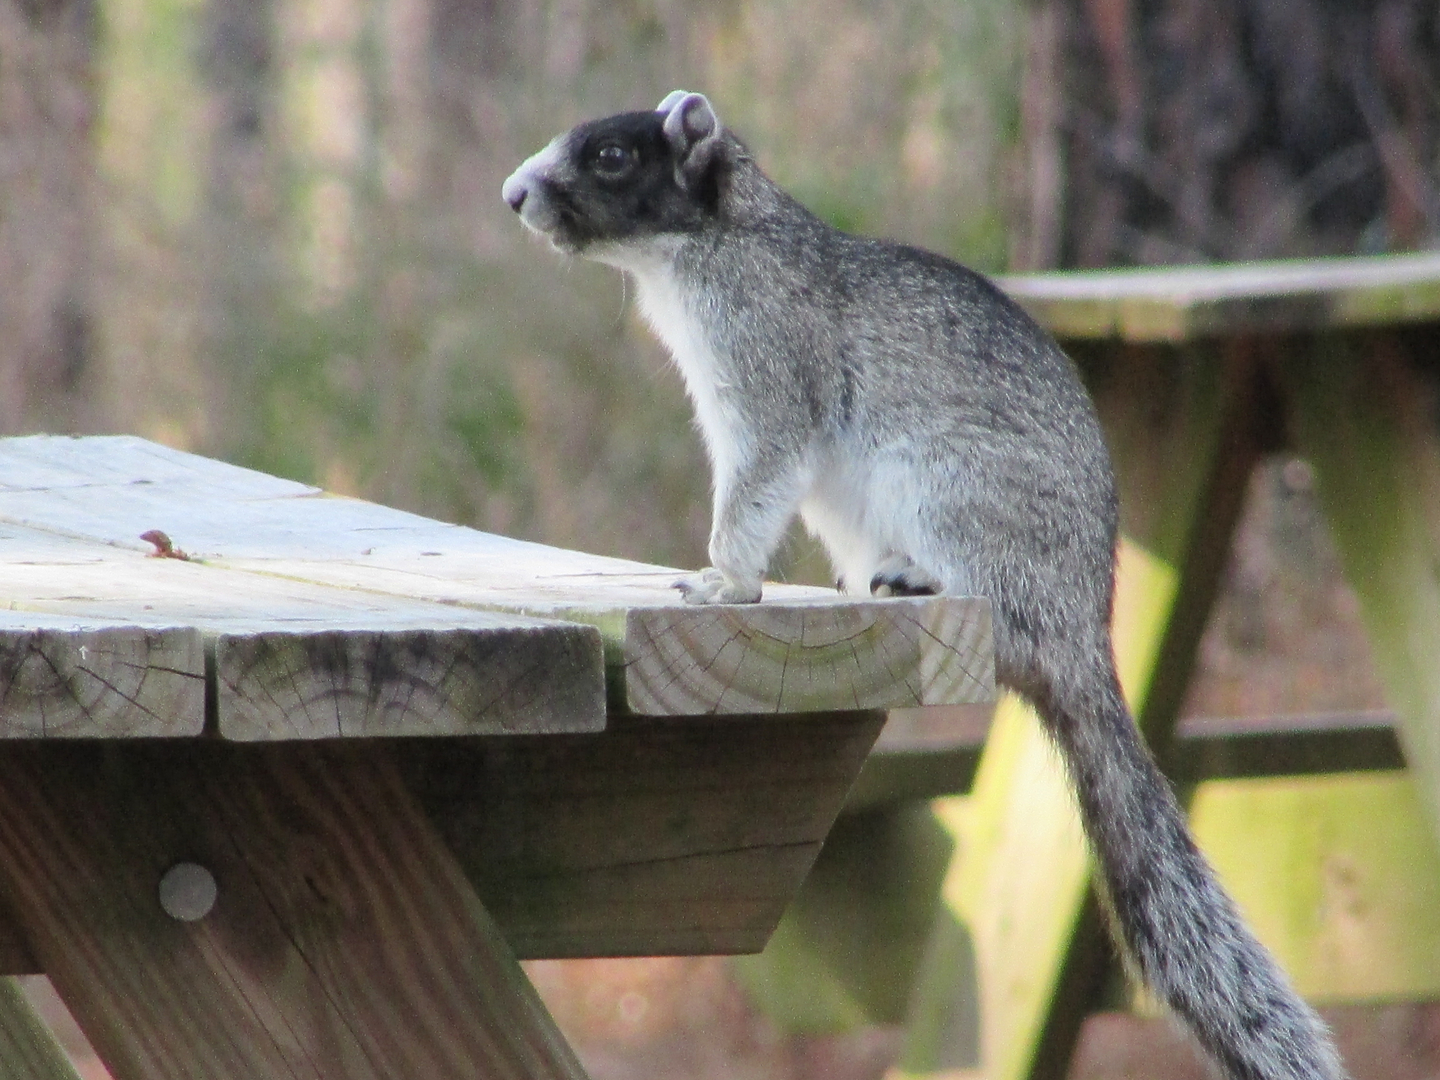 Fox Squirrel on Picnic Table